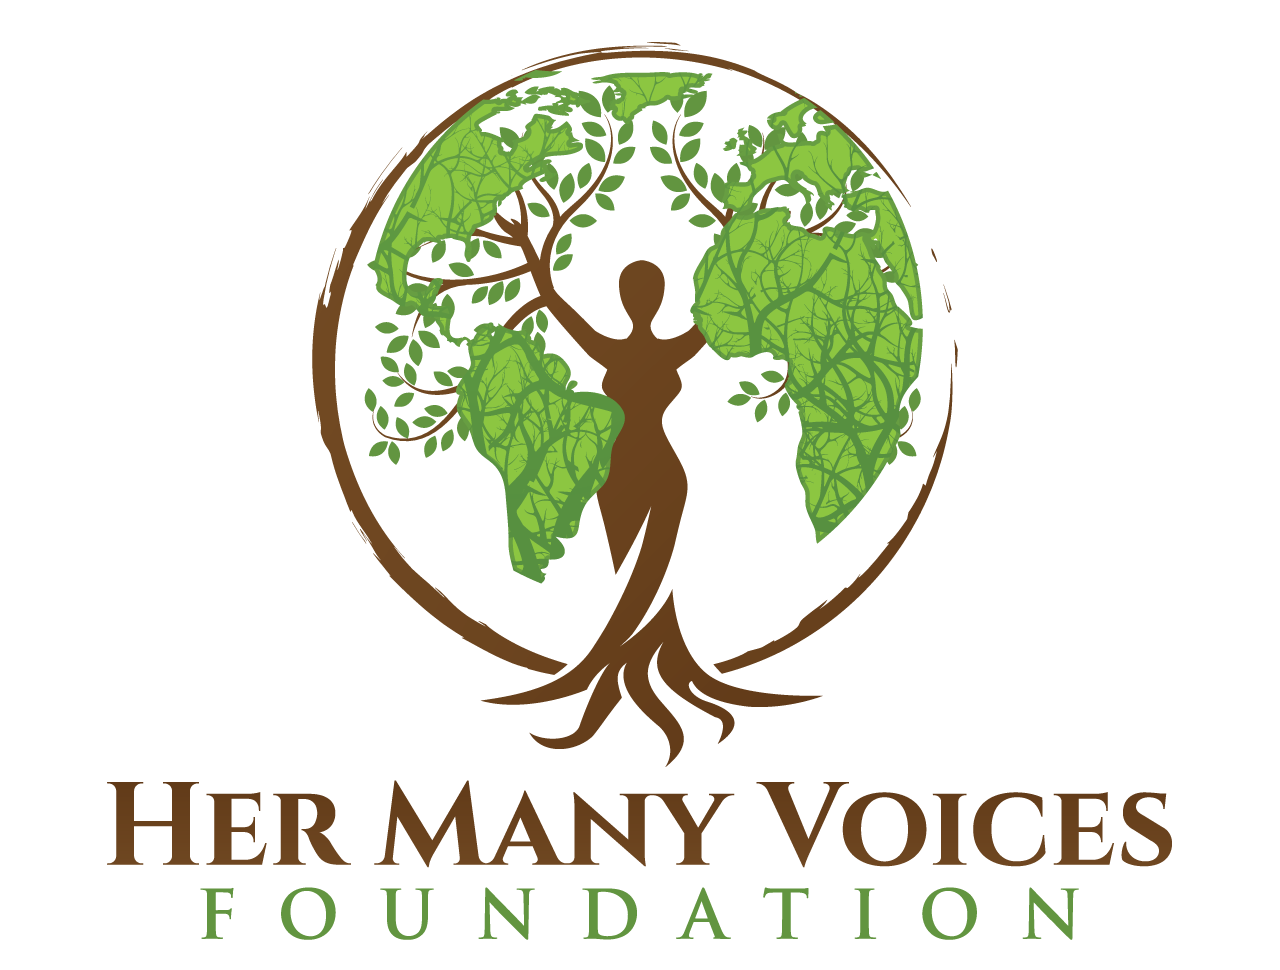 Her Many Voices Foundation logo